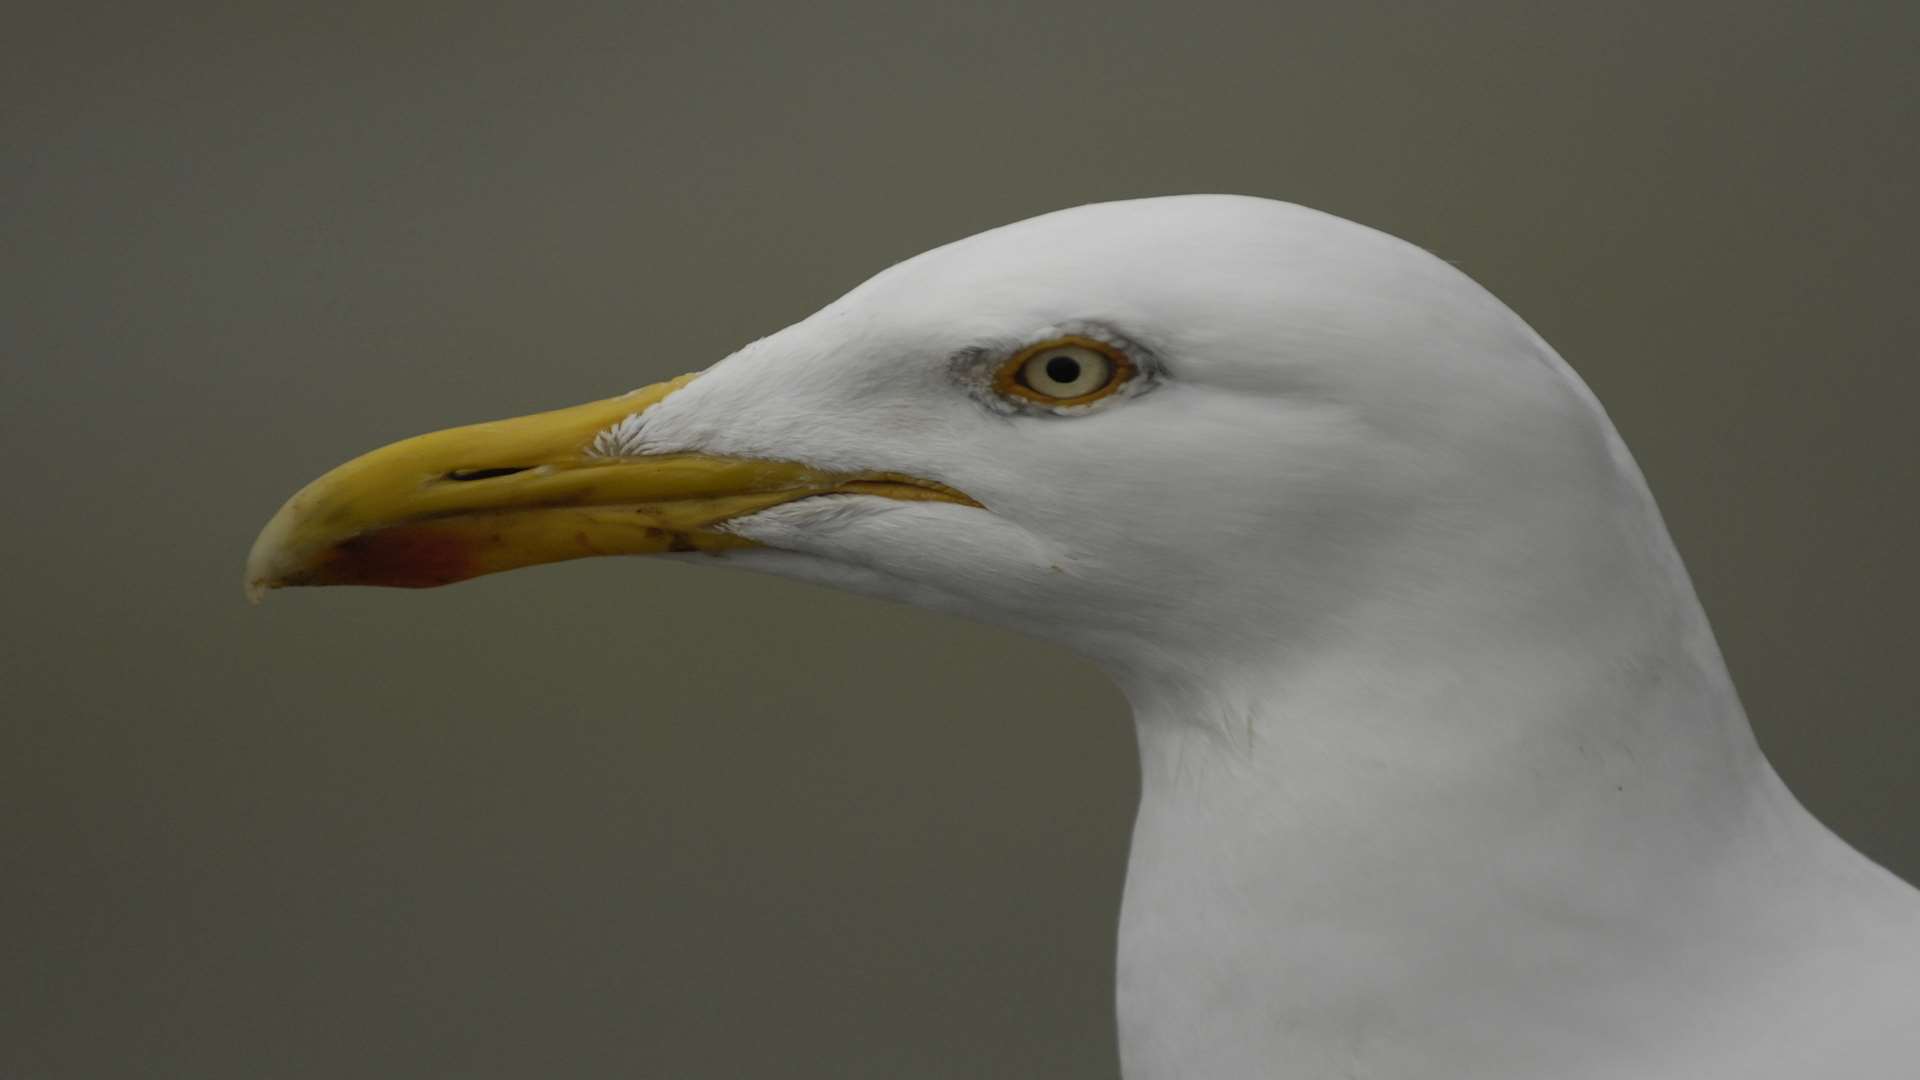 Folkestone seagull. One was trapped in Asda.